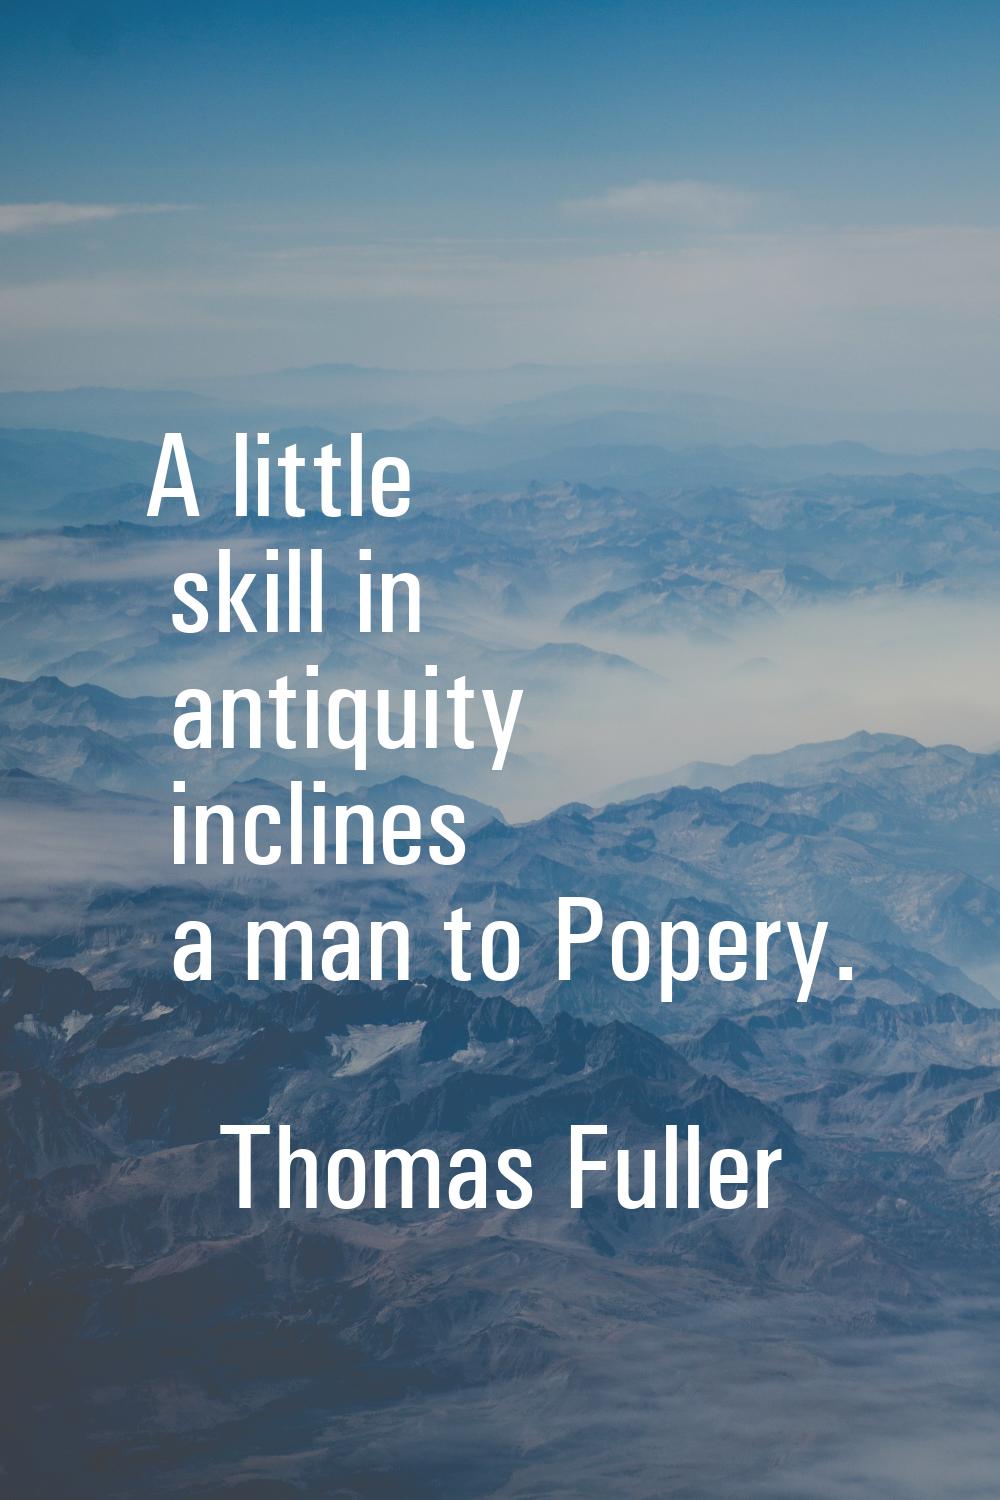 A little skill in antiquity inclines a man to Popery.